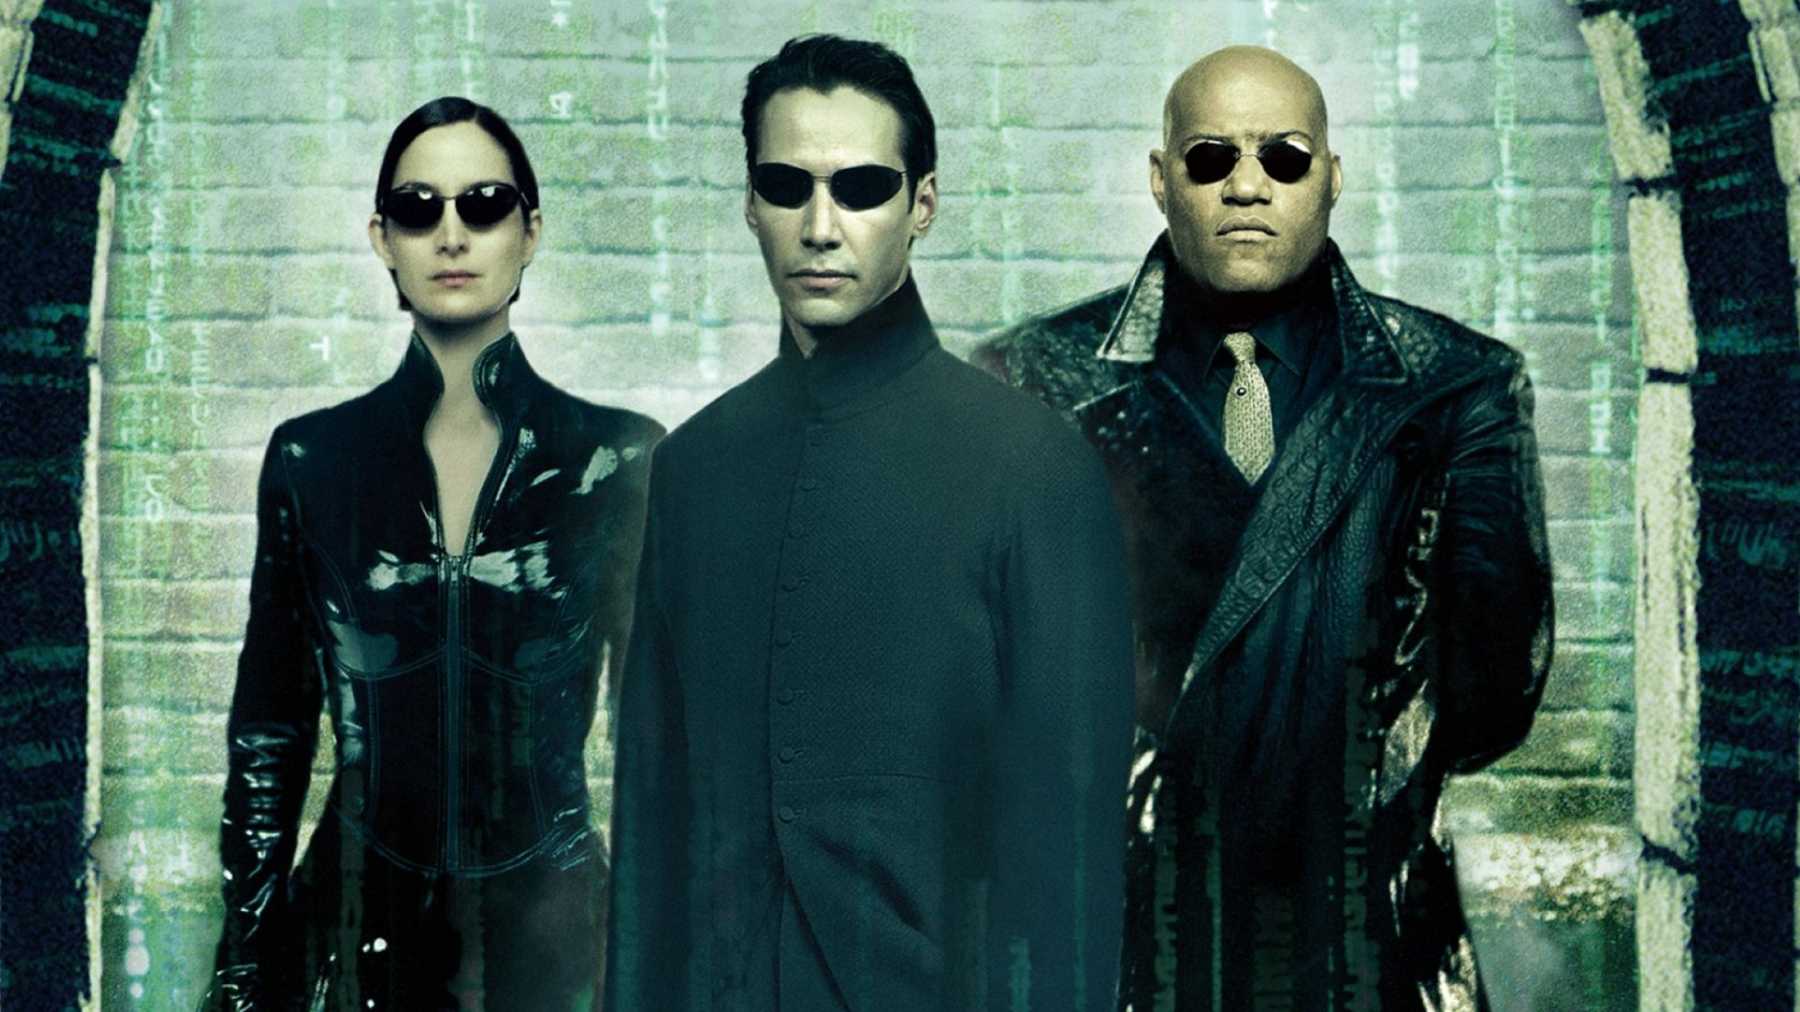 Pick a Celeb to Watch These Movies With and We’ll Reveal the Final Ending Matrix Reloaded